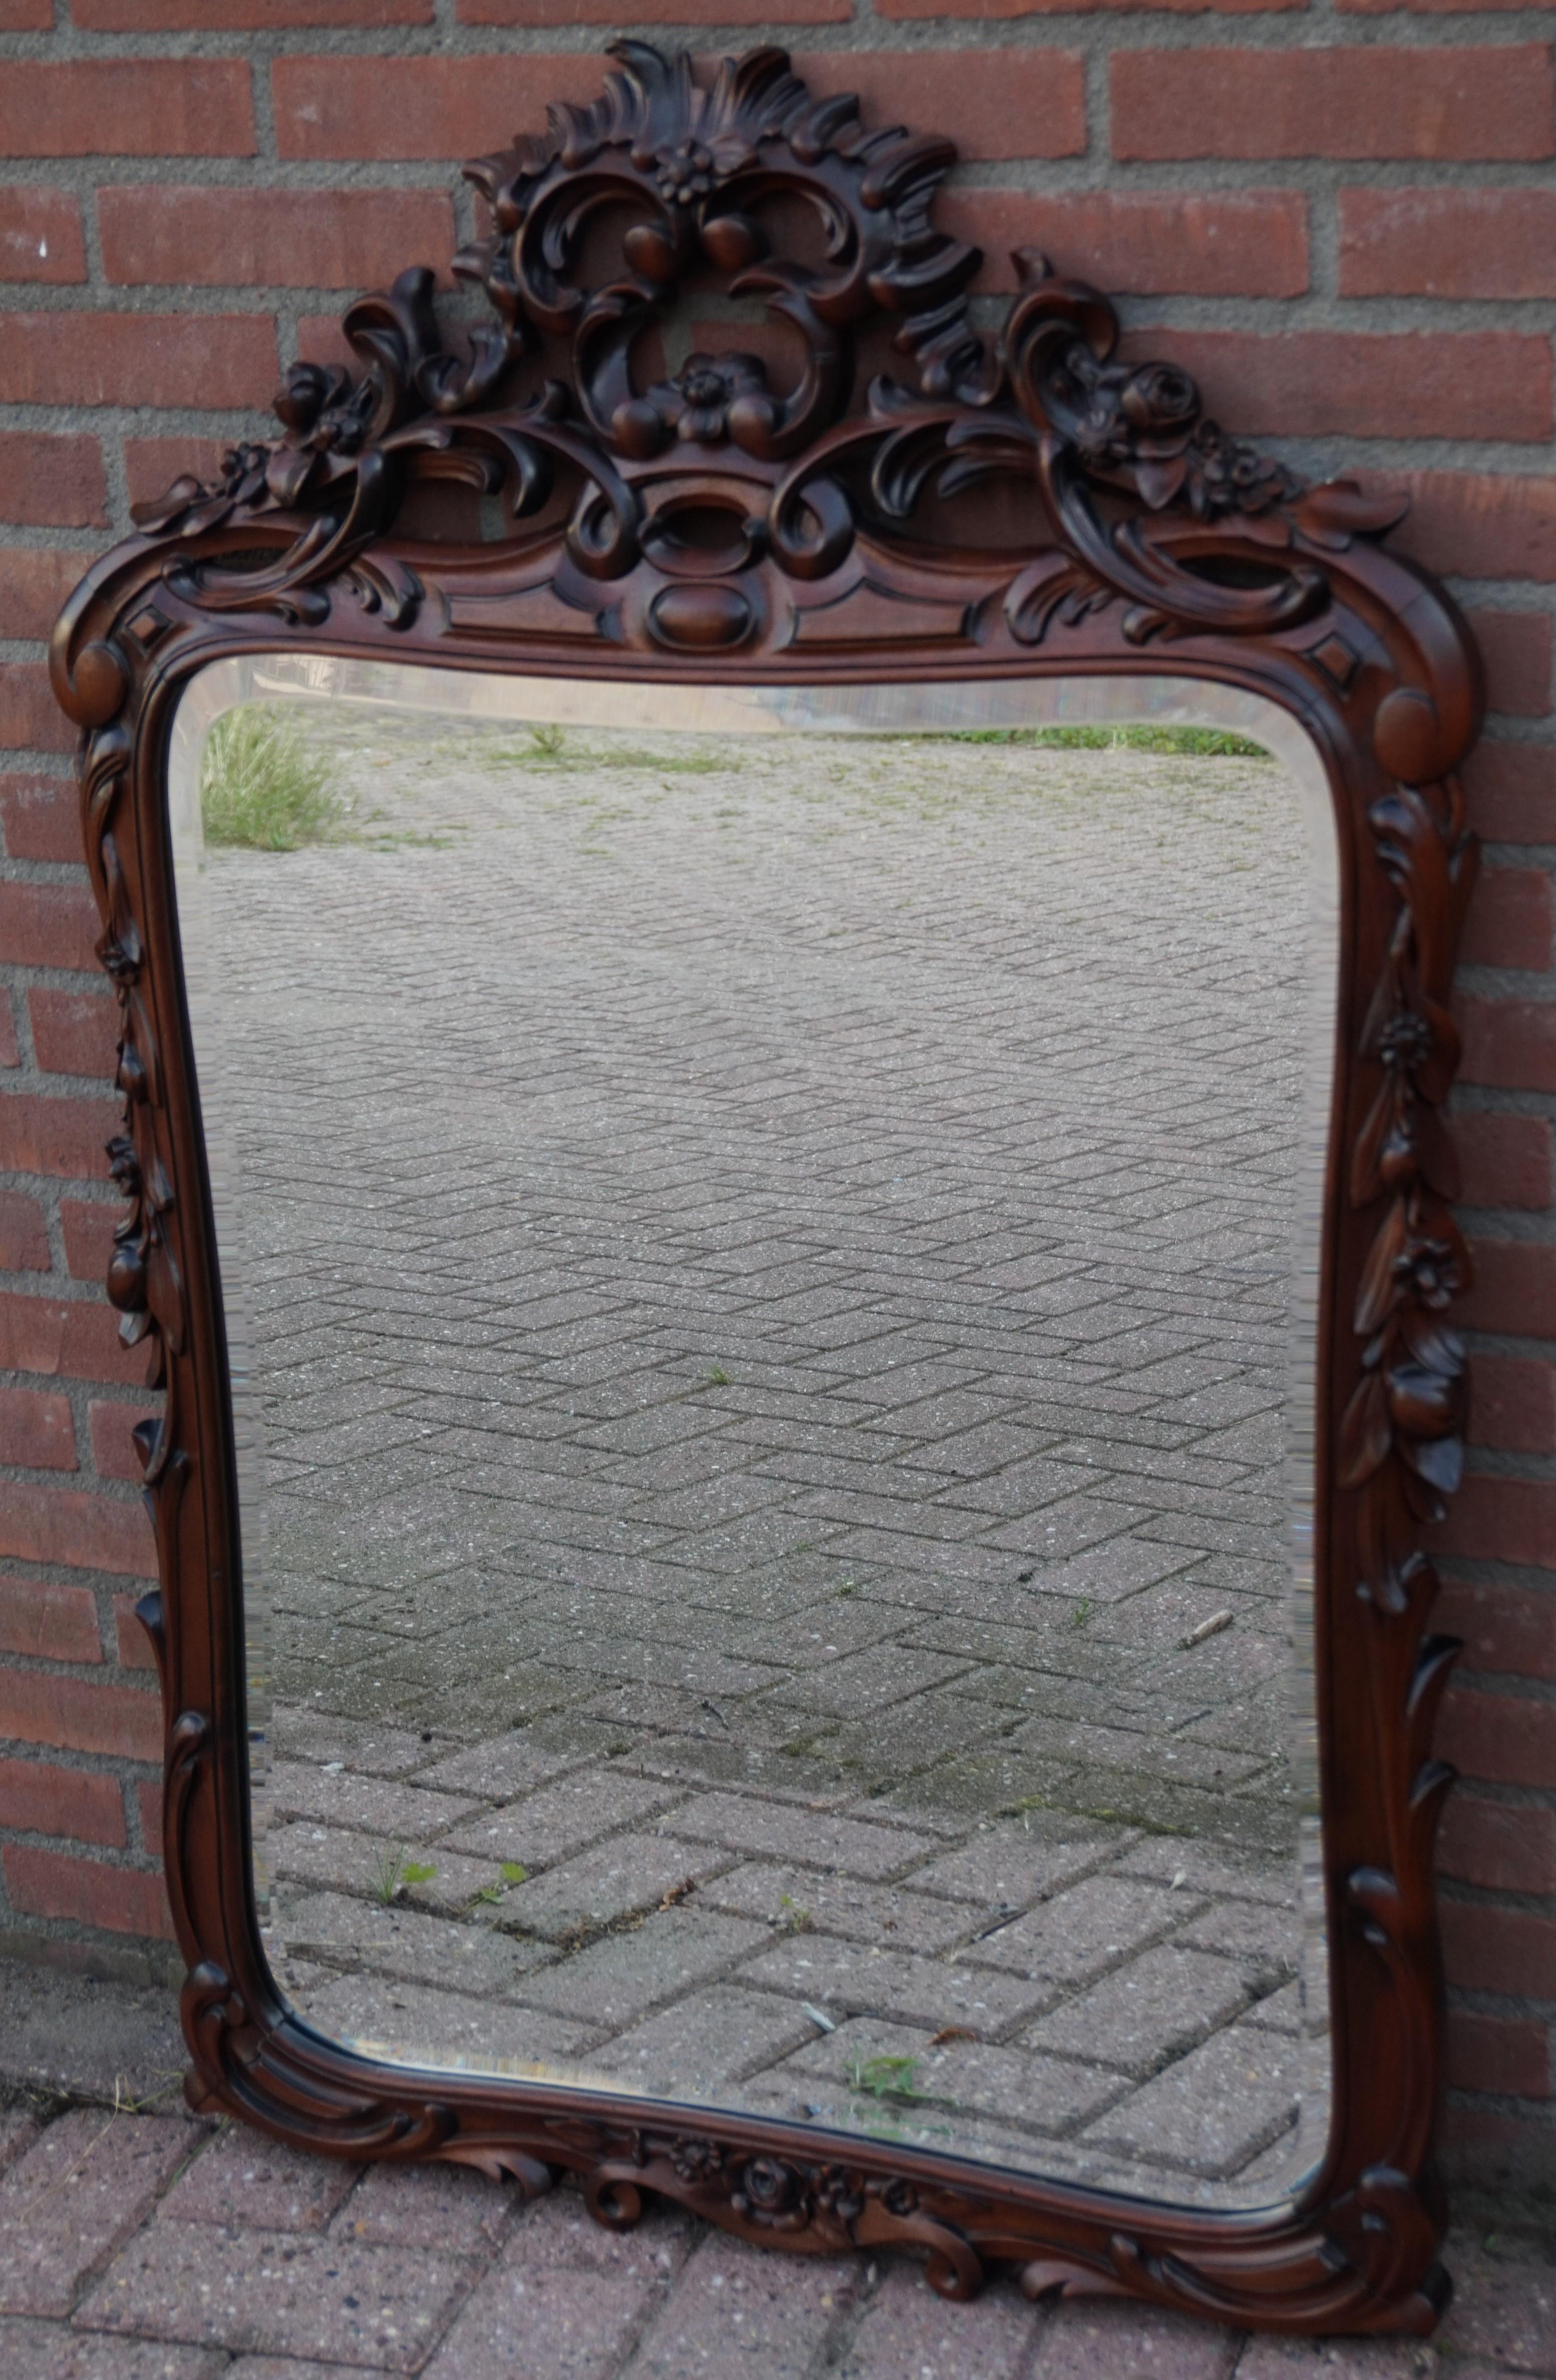 Perfect size and stunning antique wall mirror.

All handcrafted in the late 1800s this marvelous wall mirror would have graced the living space of a mansion of a very well to do family or individual. This incredibly well carved and highly stylish,